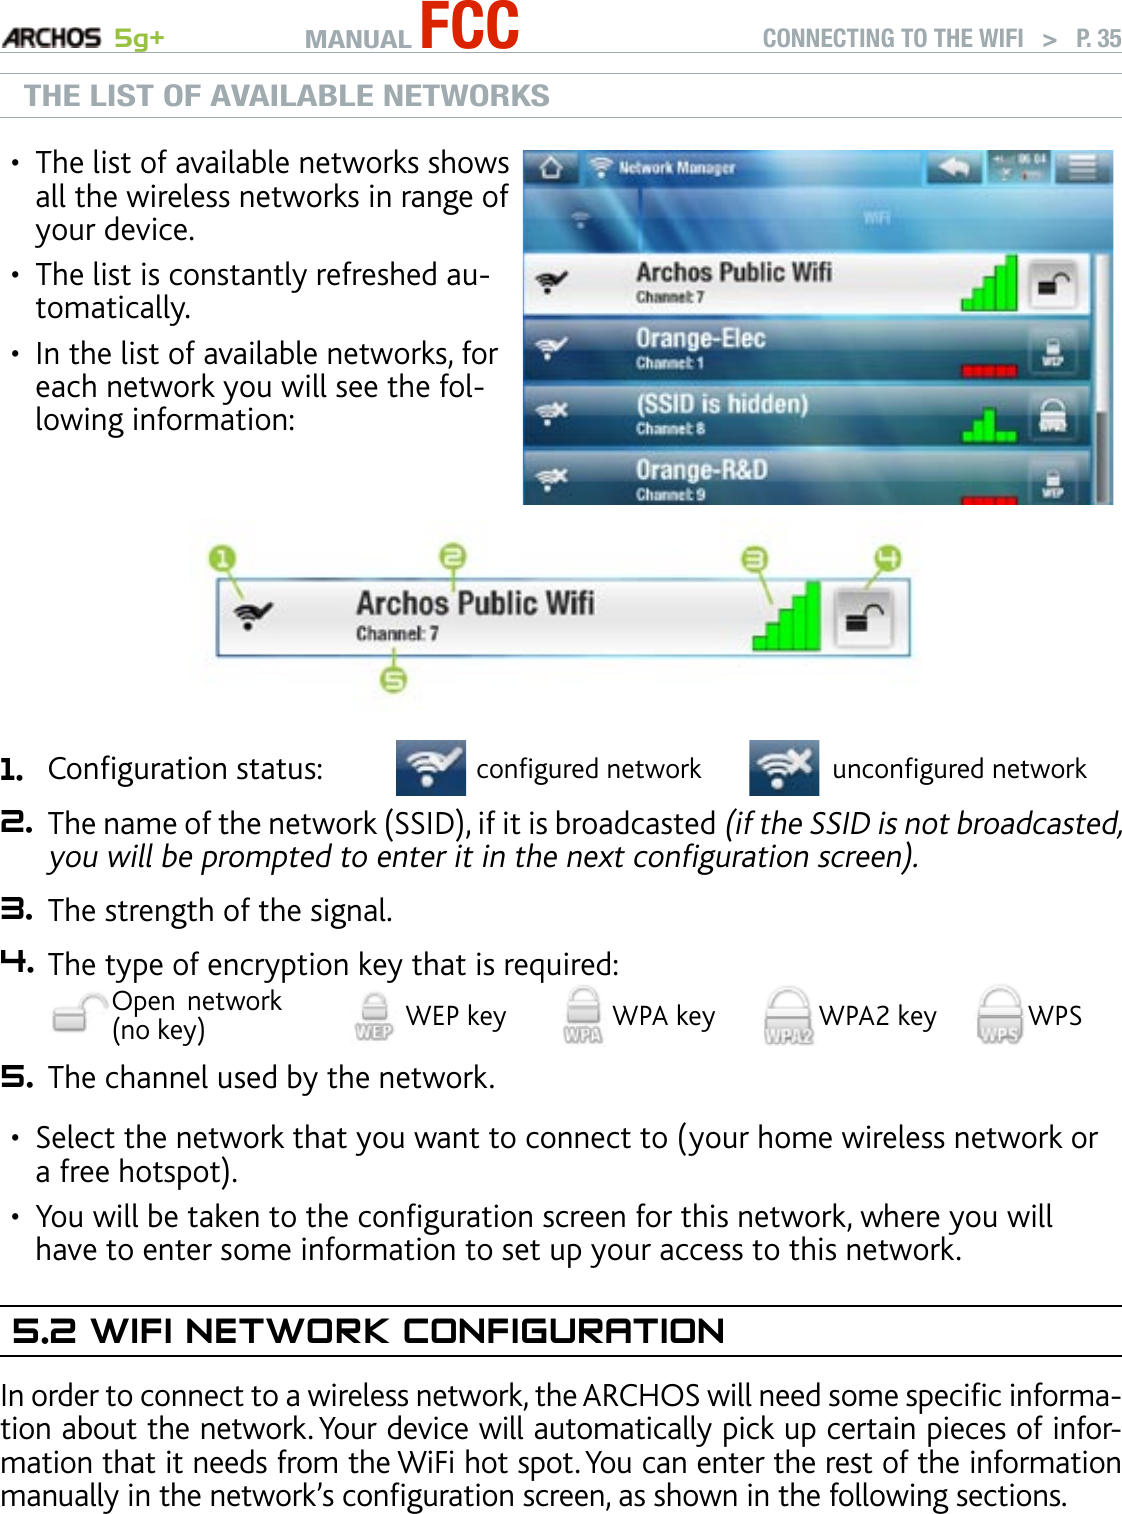 MANUAL FCC 5g+ CONNECTING TO THE WIFI   &gt;   P. 35THE LIST OF AVAILABLE NETWORKSThe list of available networks shows all the wireless networks in range of your device.The list is constantly refreshed au-tomatically.In the list of available networks, for each network you will see the fol-lowing information:•••1. Conguration status: congured network uncongured network2. The name of the network (SSID), if it is broadcasted (if the SSID is not broadcasted, you will be prompted to enter it in the next conguration screen).3. The strength of the signal.4. The type of encryption key that is required:Open  network (no key) WEP key WPA key WPA2 key WPS5. The channel used by the network.Select the network that you want to connect to (your home wireless network or a free hotspot).You will be taken to the conguration screen for this network, where you will have to enter some information to set up your access to this network.5.2 wIfI neTwOrk COnfIguraTIOnIn order to connect to a wireless network, the ARCHOS will need some specic informa-tion about the network. Your device will automatically pick up certain pieces of infor-mation that it needs from the WiFi hot spot. You can enter the rest of the information manually in the network’s conguration screen, as shown in the following sections.Note that your device will remember the network connection information that you enter, in order to re-use it and connect automatically to the network when it is in range.••